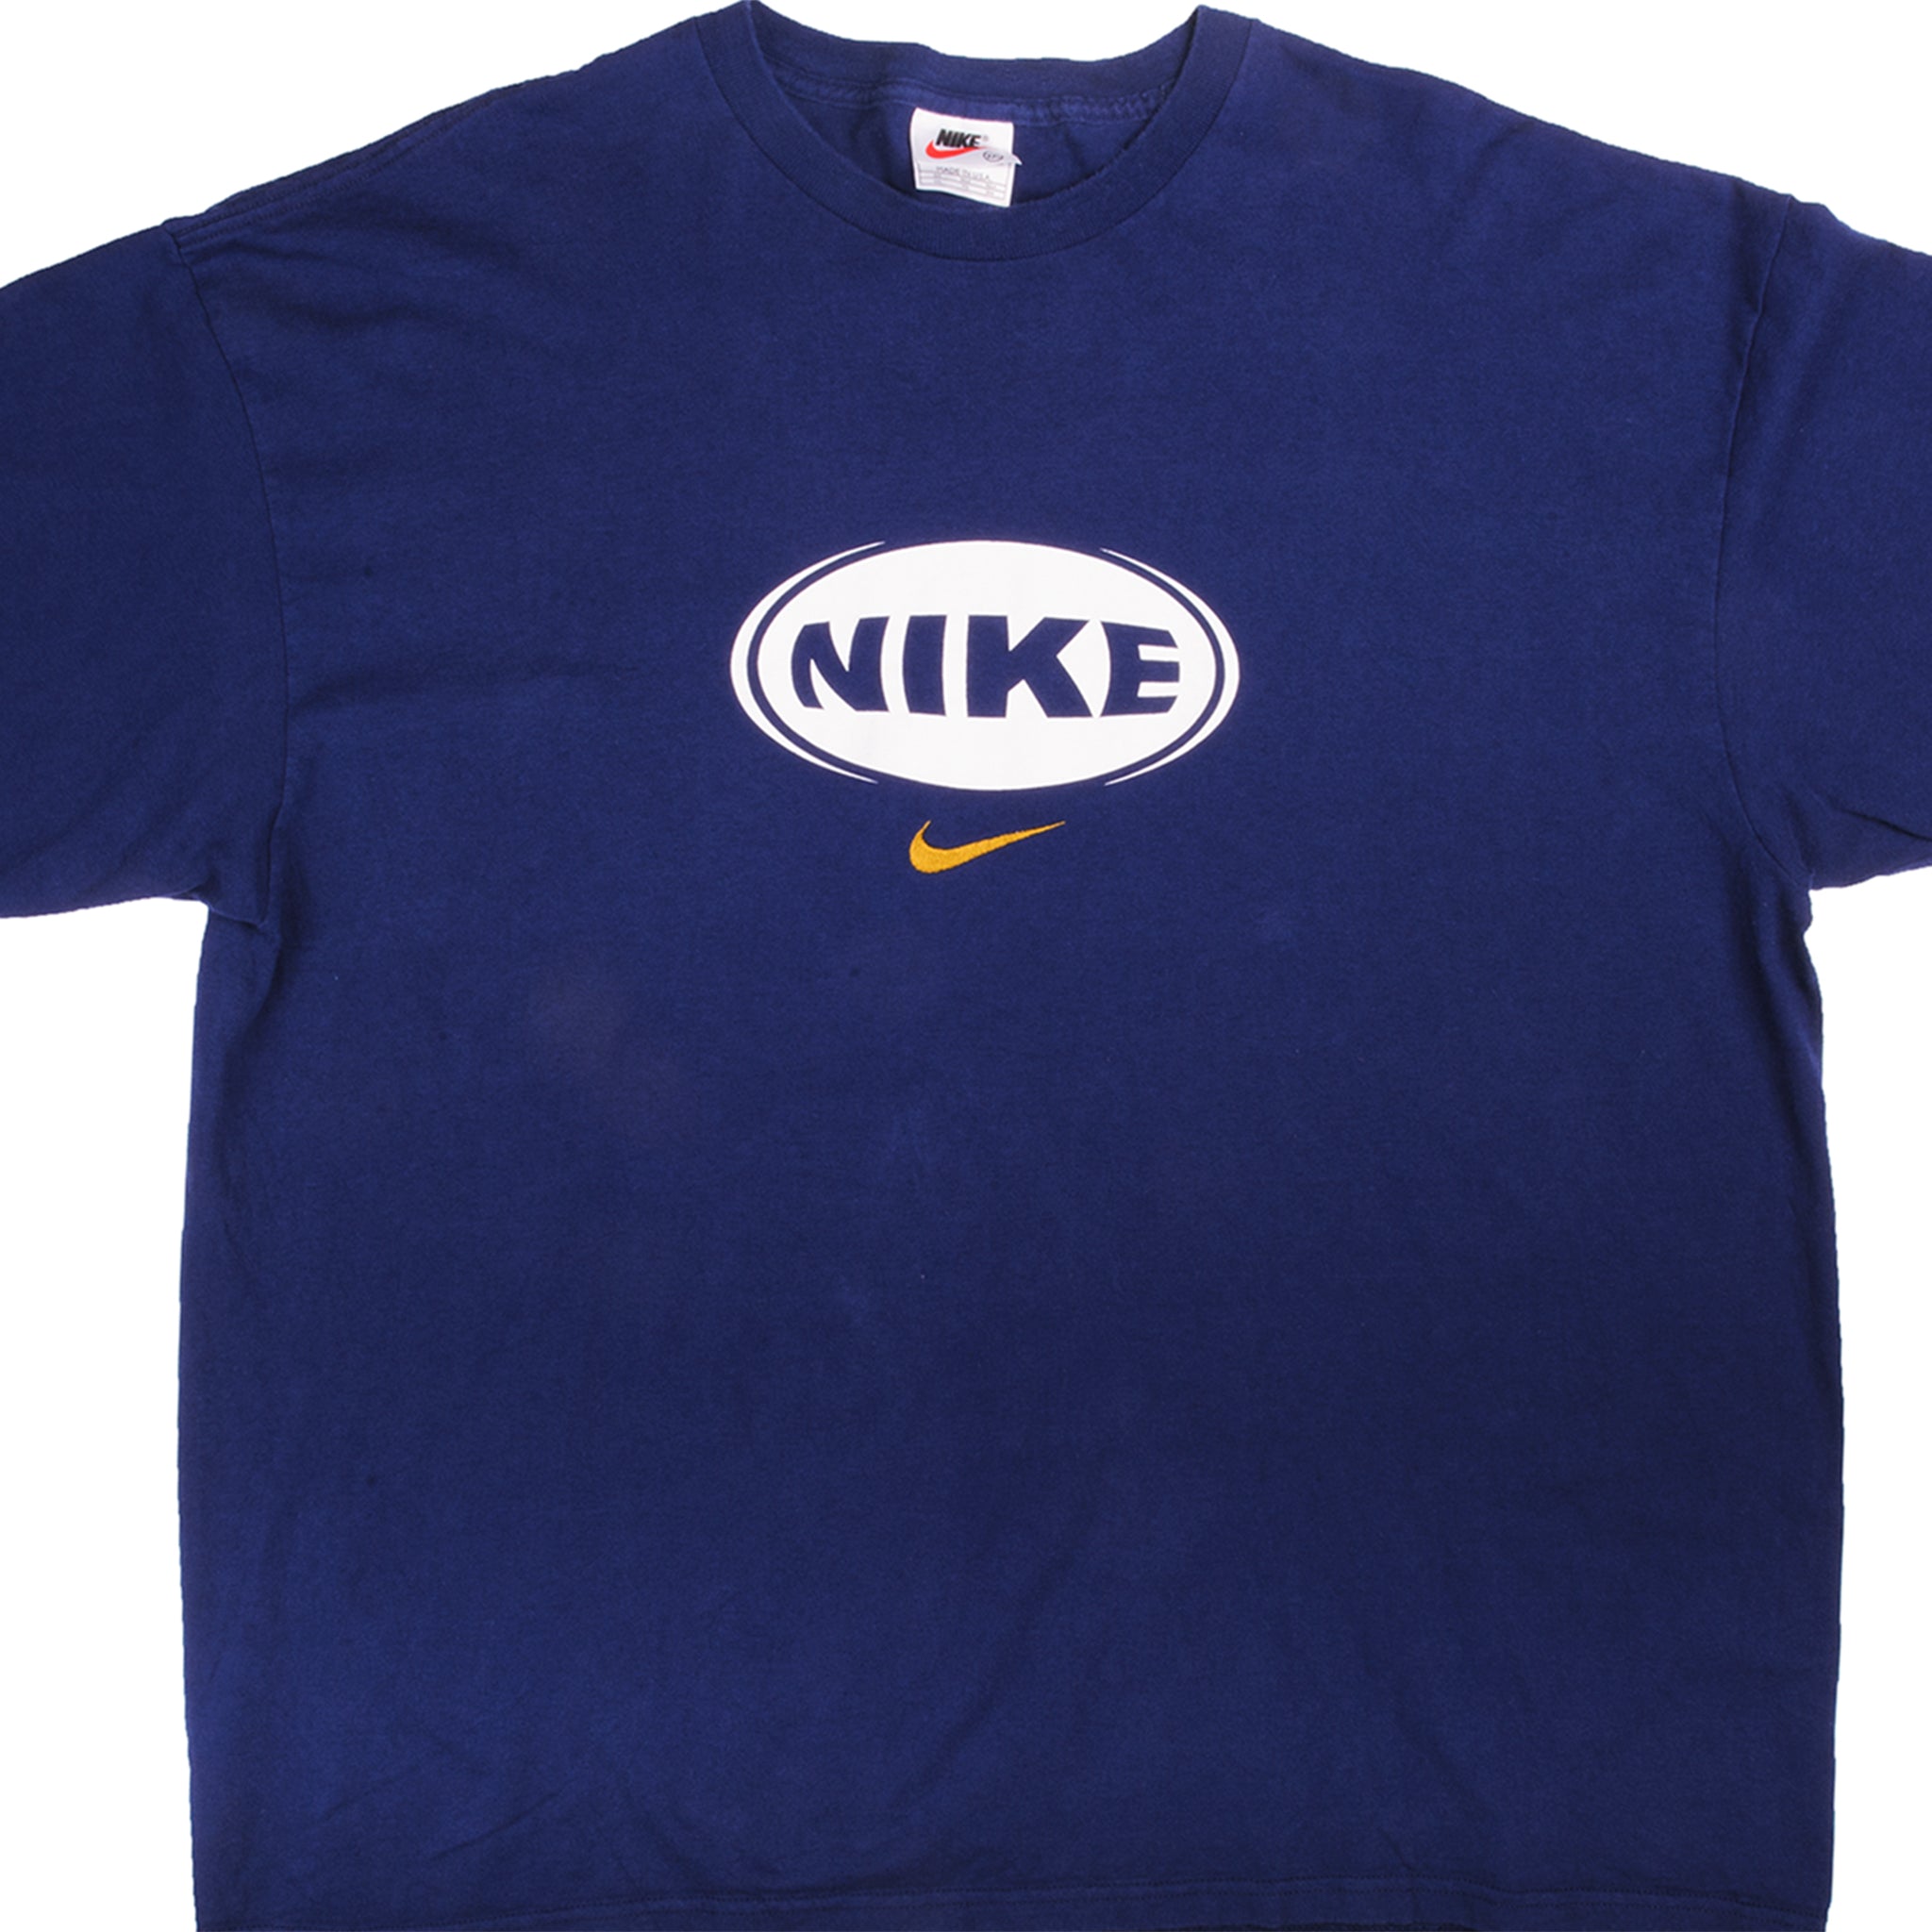 VINTAGE NIKE T-SHIRT 90s MADE IN USA - Tシャツ